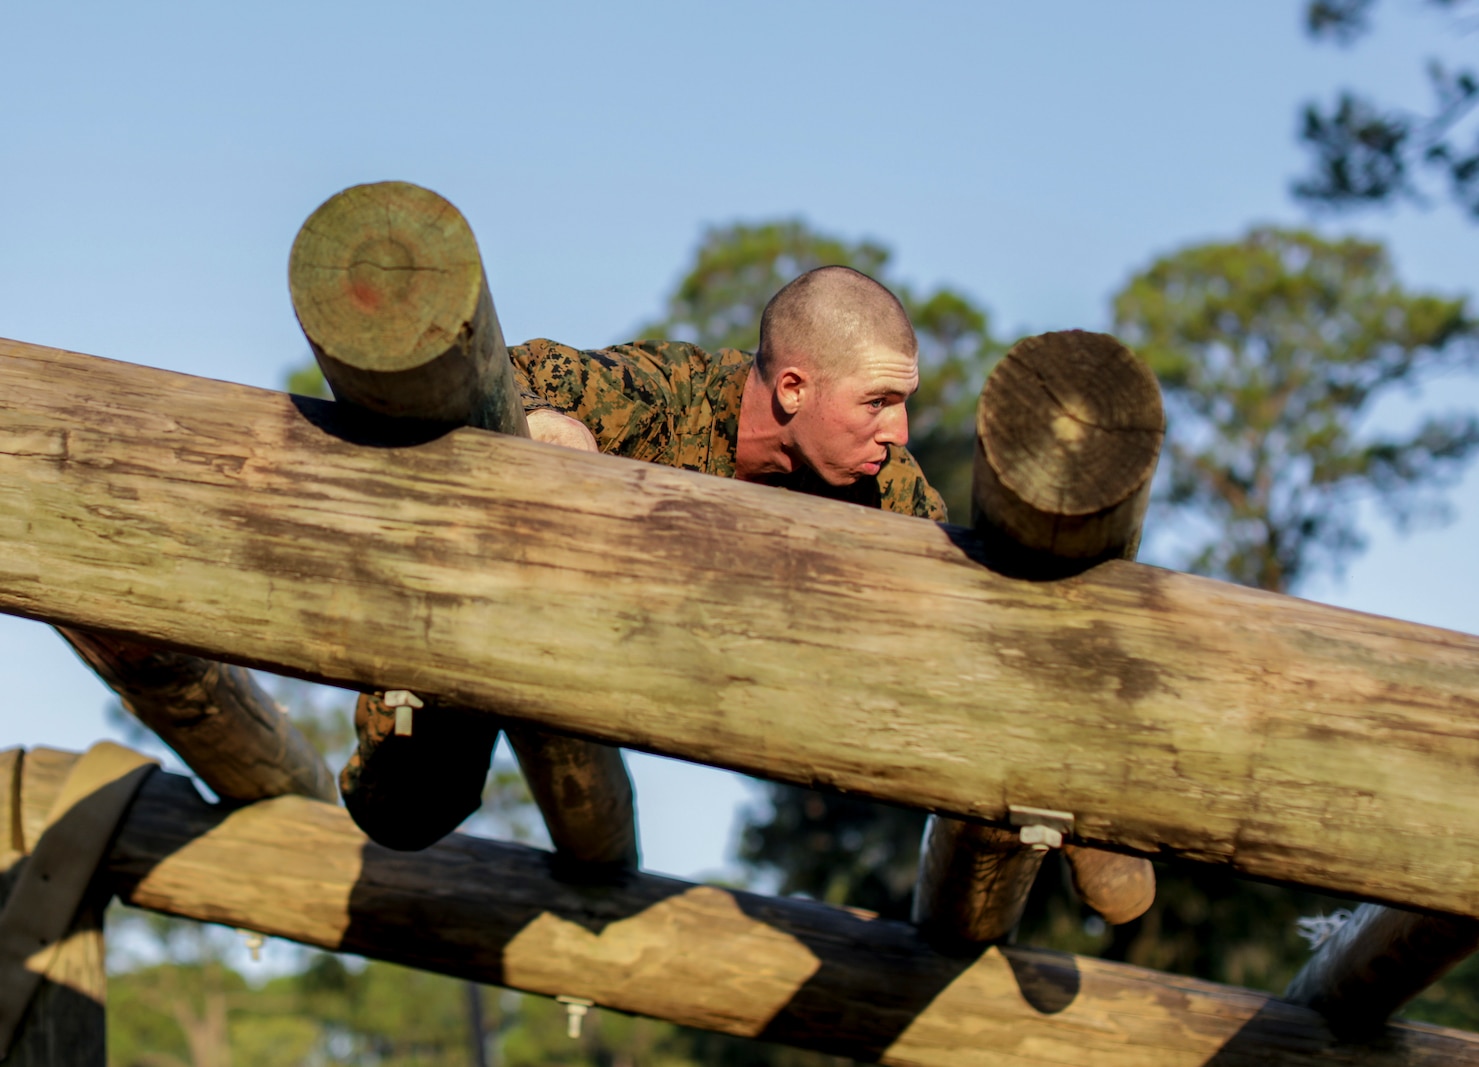 Recruits with Fox Company, 2nd Recruit Training Battalion, negotiate obstacles at the Confidence Course on Marine Corps Recruit Depot Parris Island, S.C. Sept. 17, 2019. The Confidence Course is composed of various obstacles that both physically and mentally challenge recruits. (U.S. Marine Corps photo by Lance Cpl. Dylan Walters)